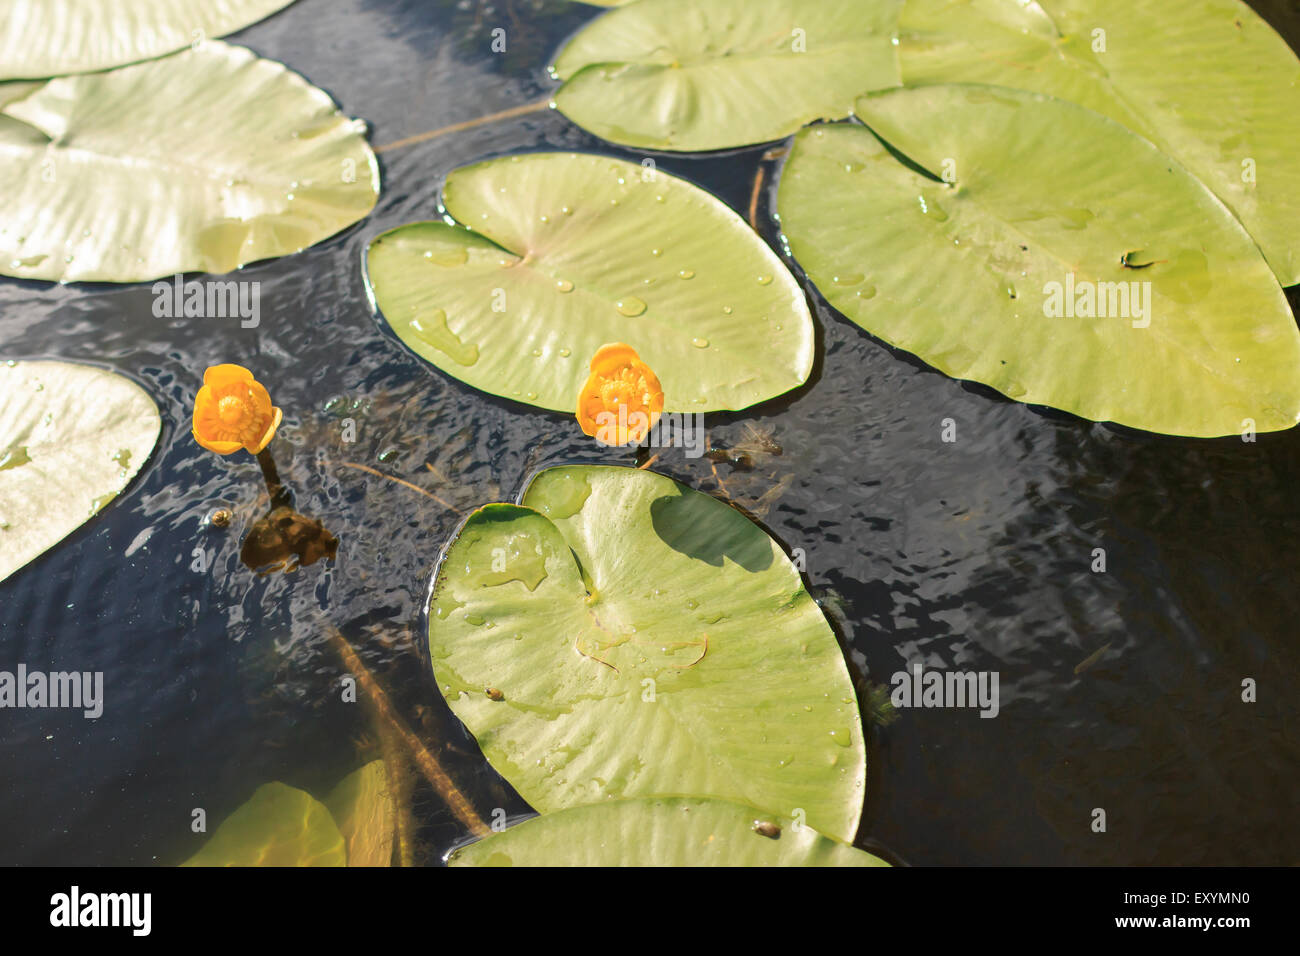 river yellow waterlily in riverside, close-up Stock Photo